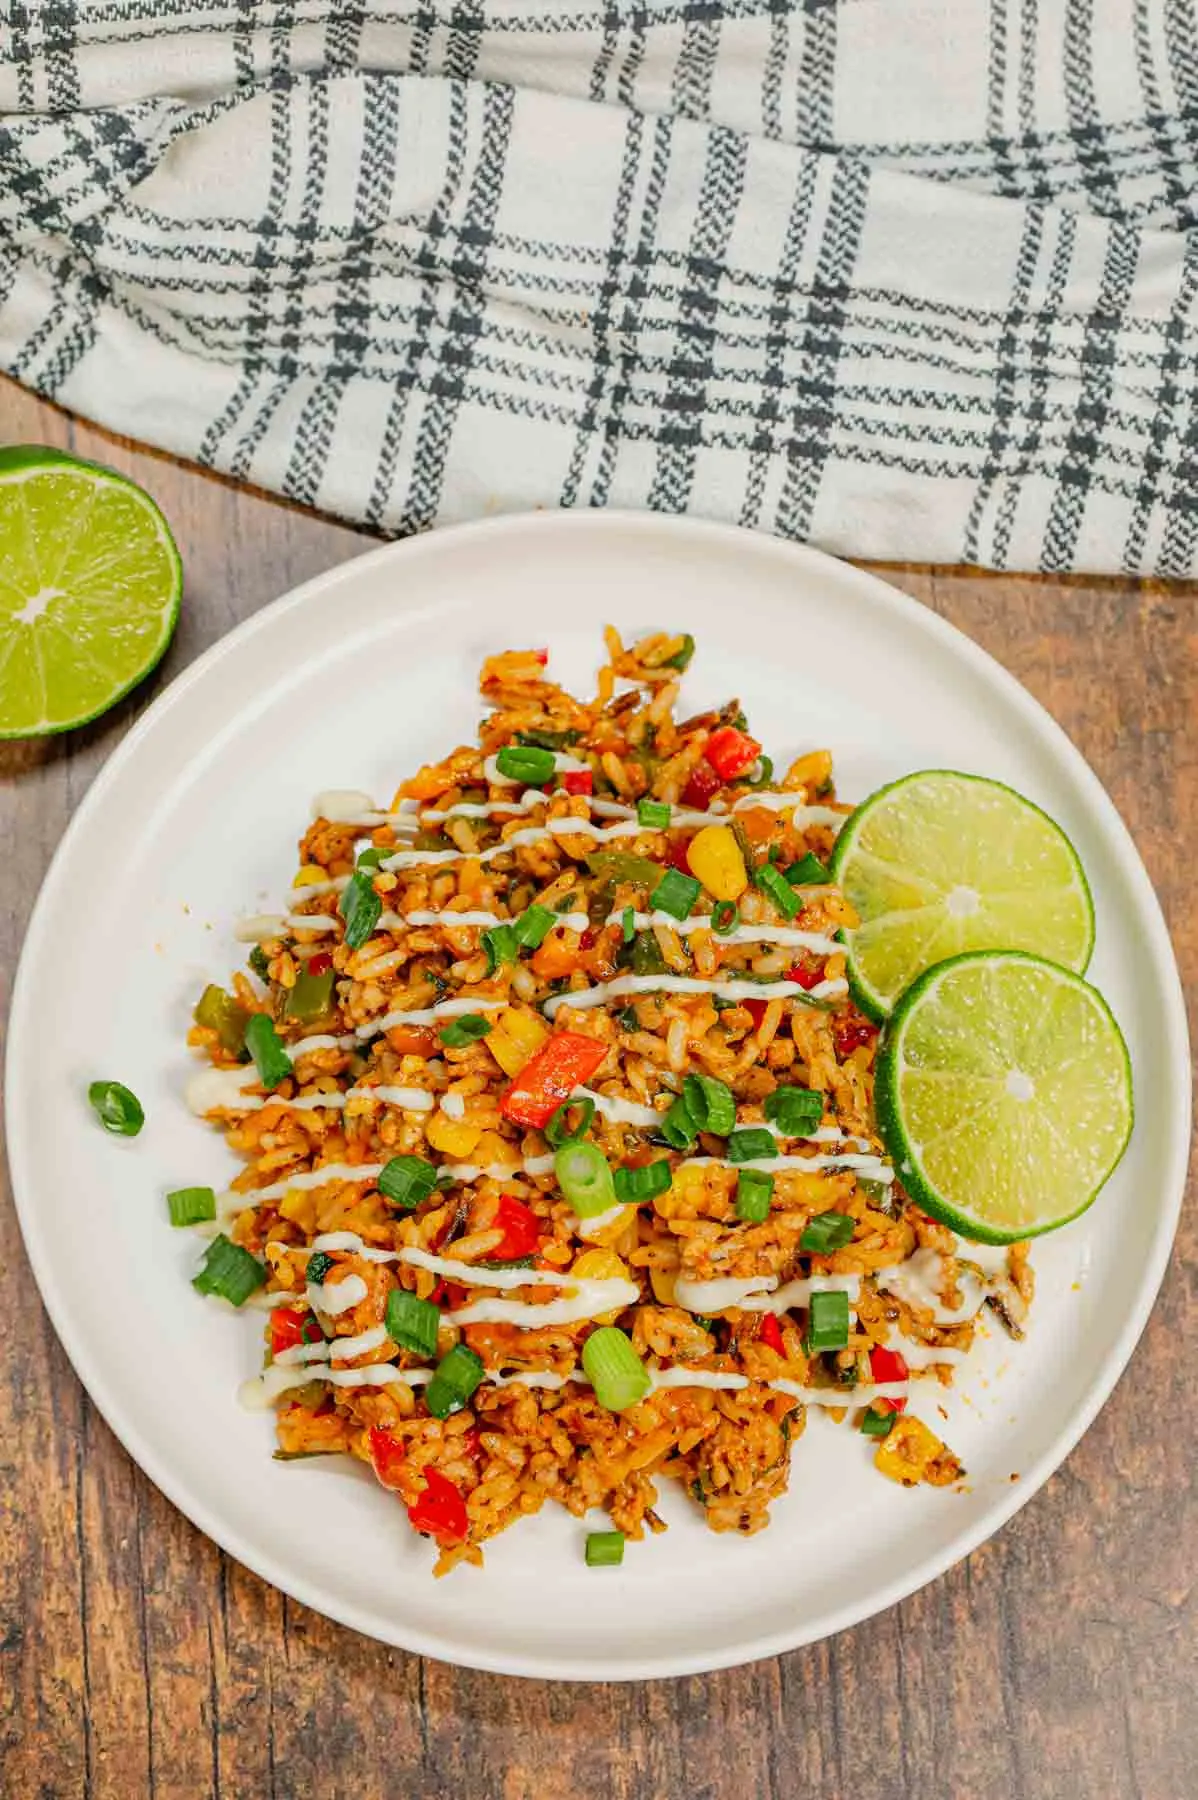 Cajun Ground Chicken and Rice is an easy weeknight dinner recipe loaded with long grain and wild rice, ground chicken, diced bell peppers, corn, chopped spinach, Cajun seasoning, green onions, ranch dressing and cheddar cheese.